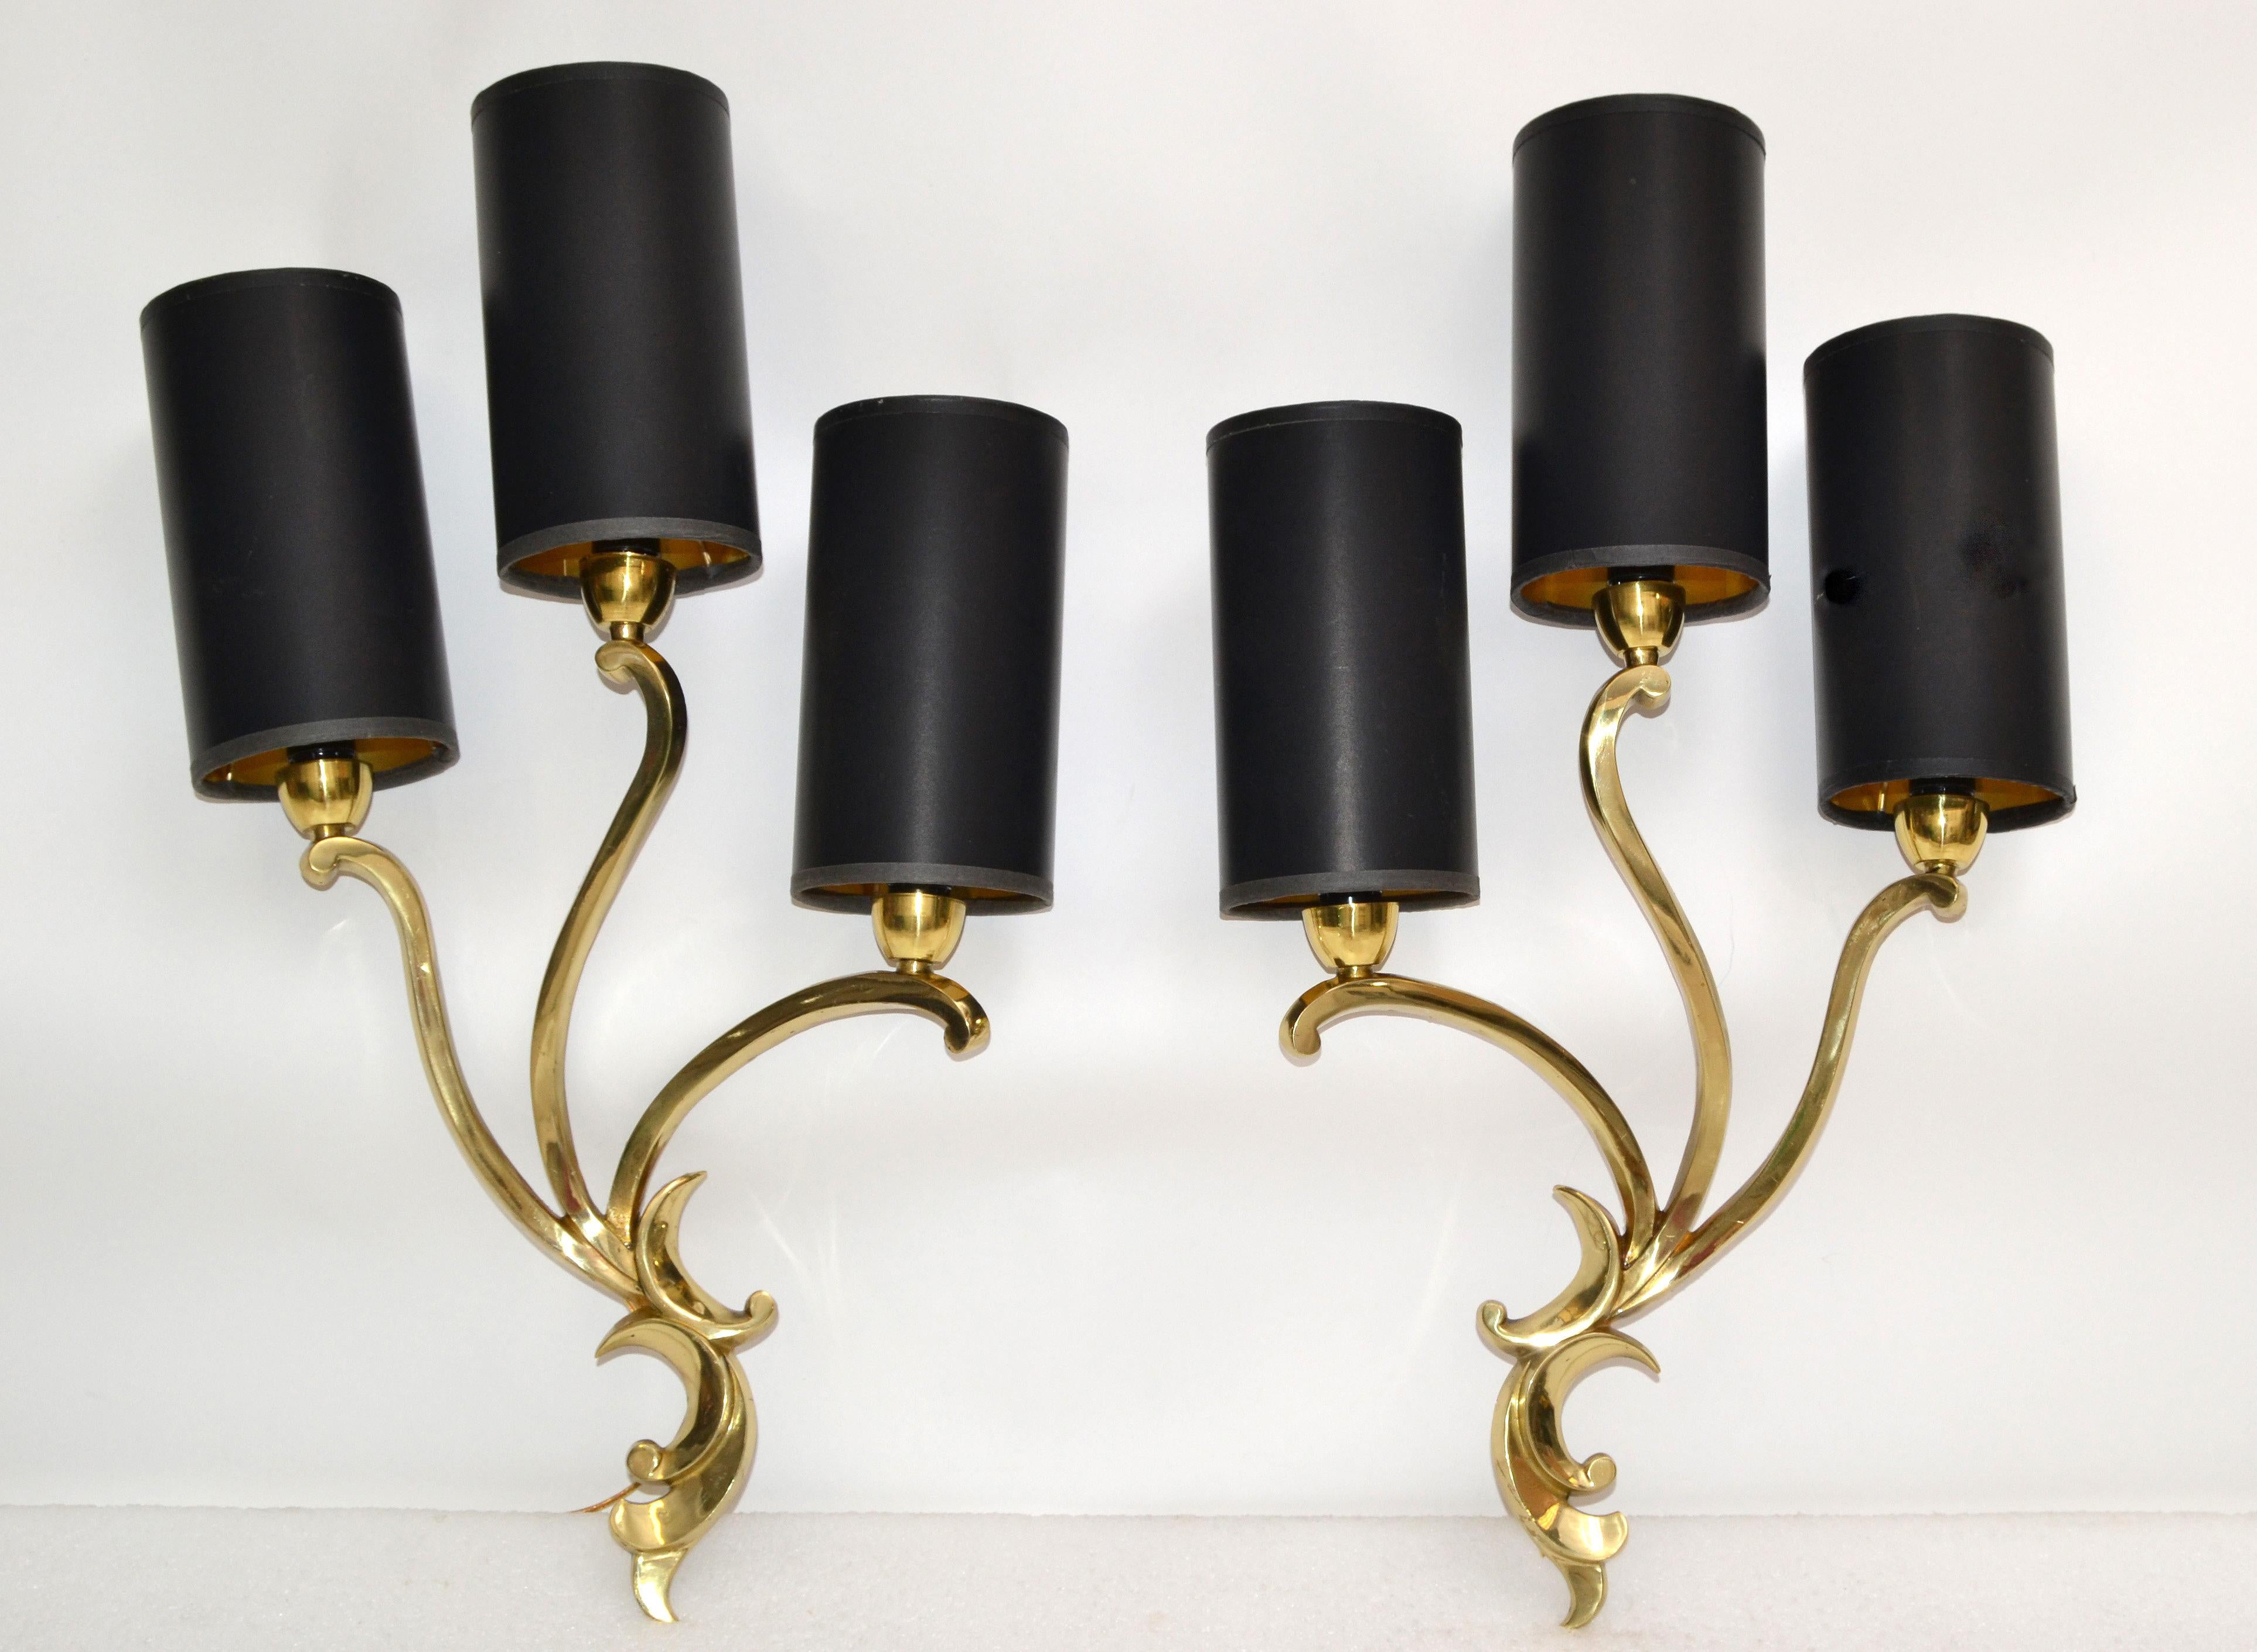 Superb pair of Riccardo Scarpa bronze sconces.
Three lights, 60 watts max per light.
US rewired and in working condition.
Marked at the reverse.
Custom backplate available.